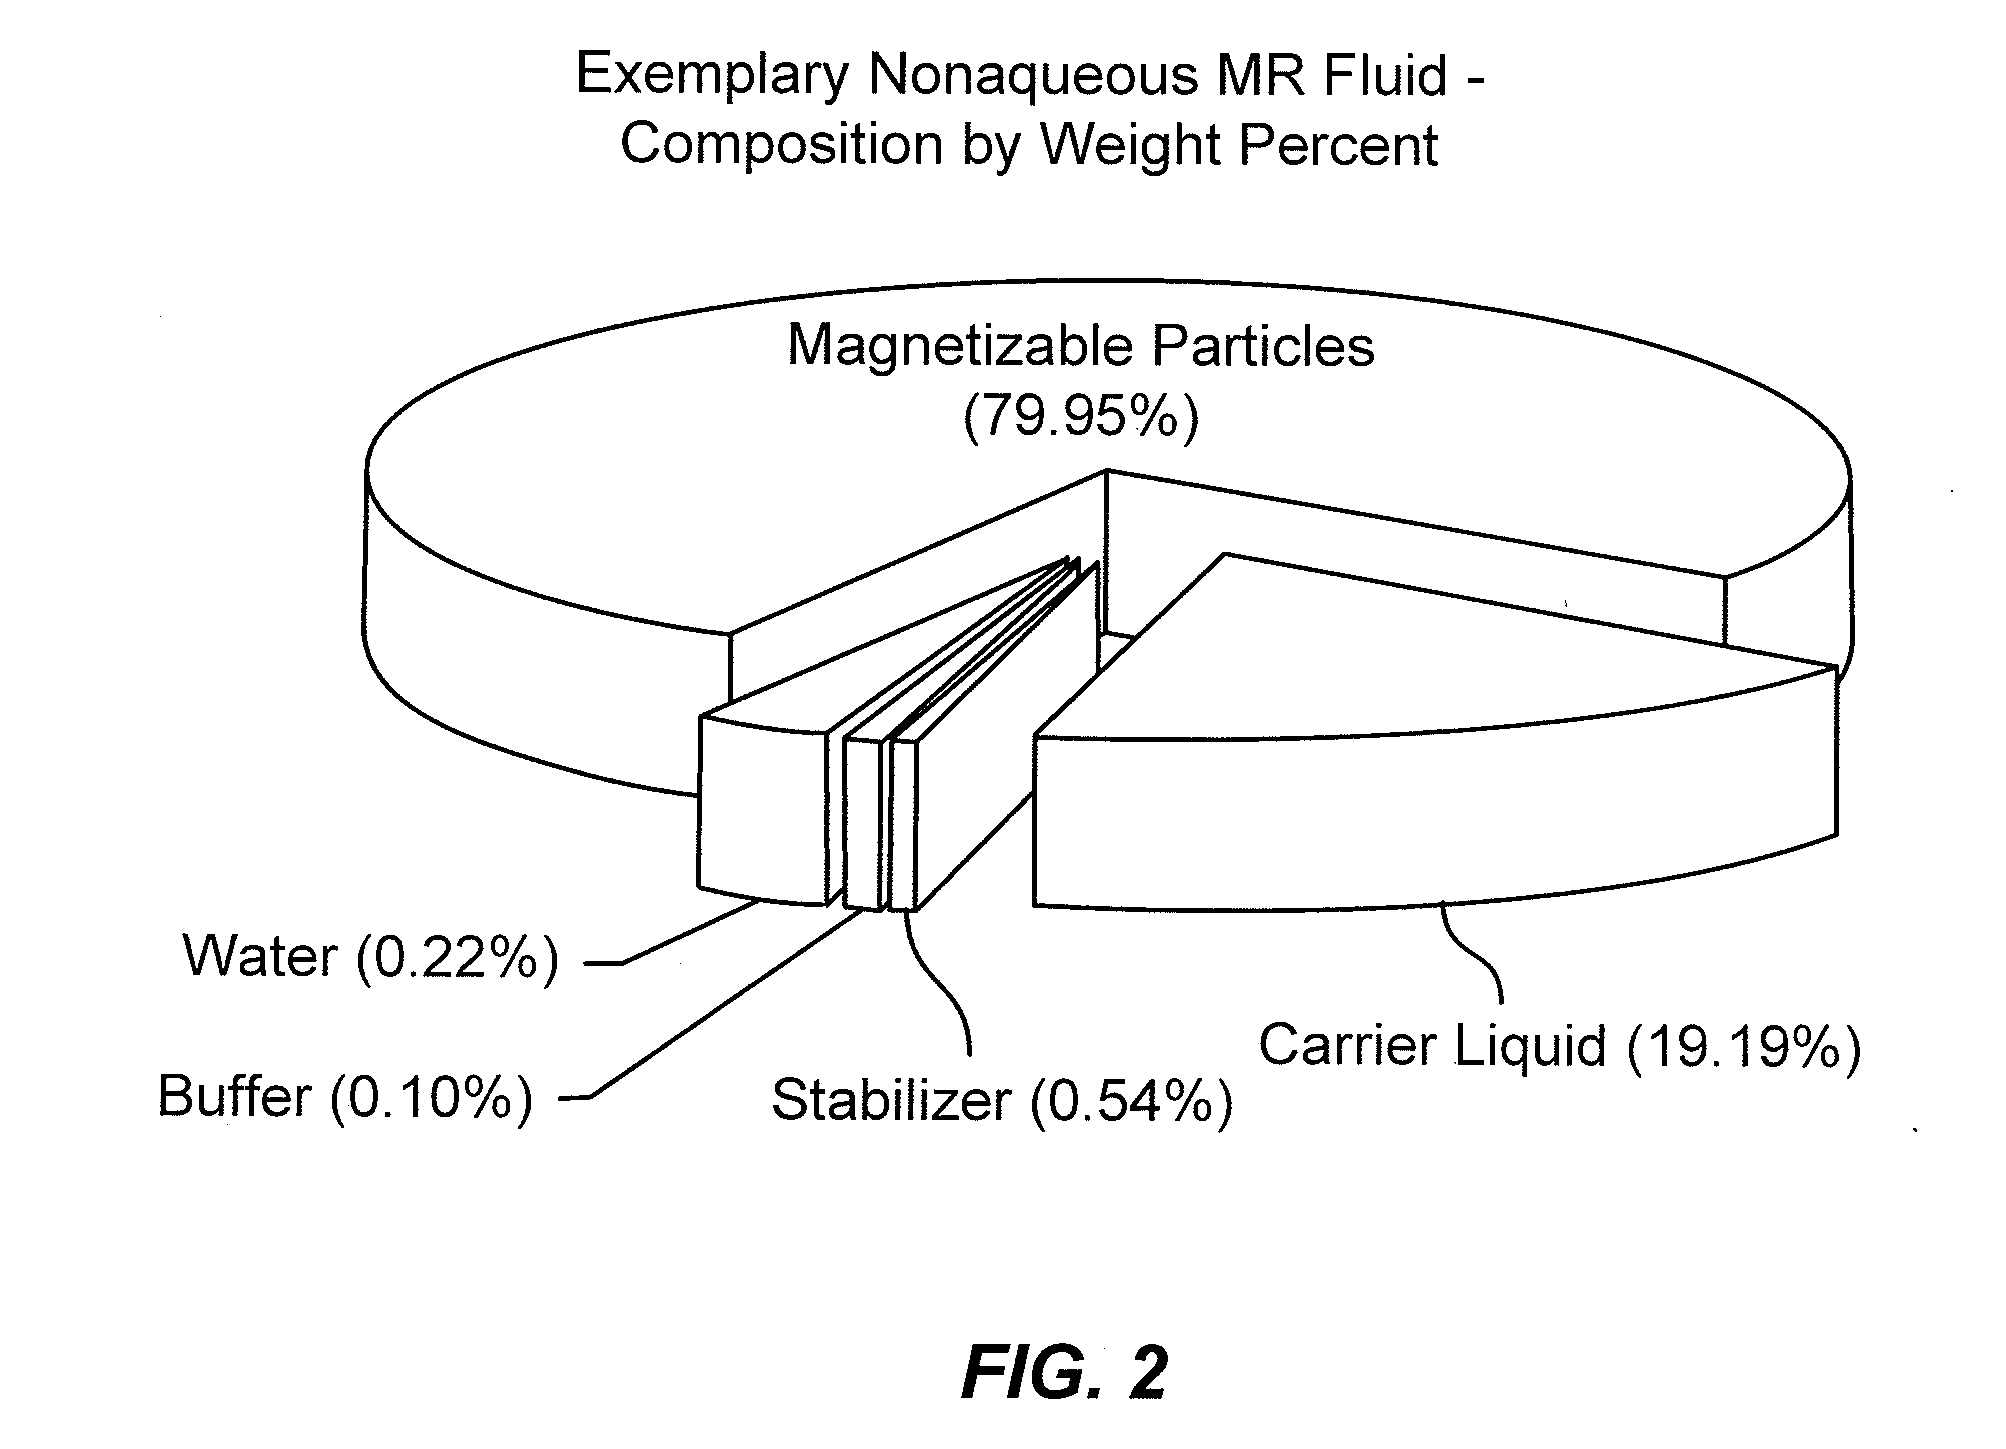 Method and System for Polishing Materials Using a Nonaqueous Magnetorheological Fluid